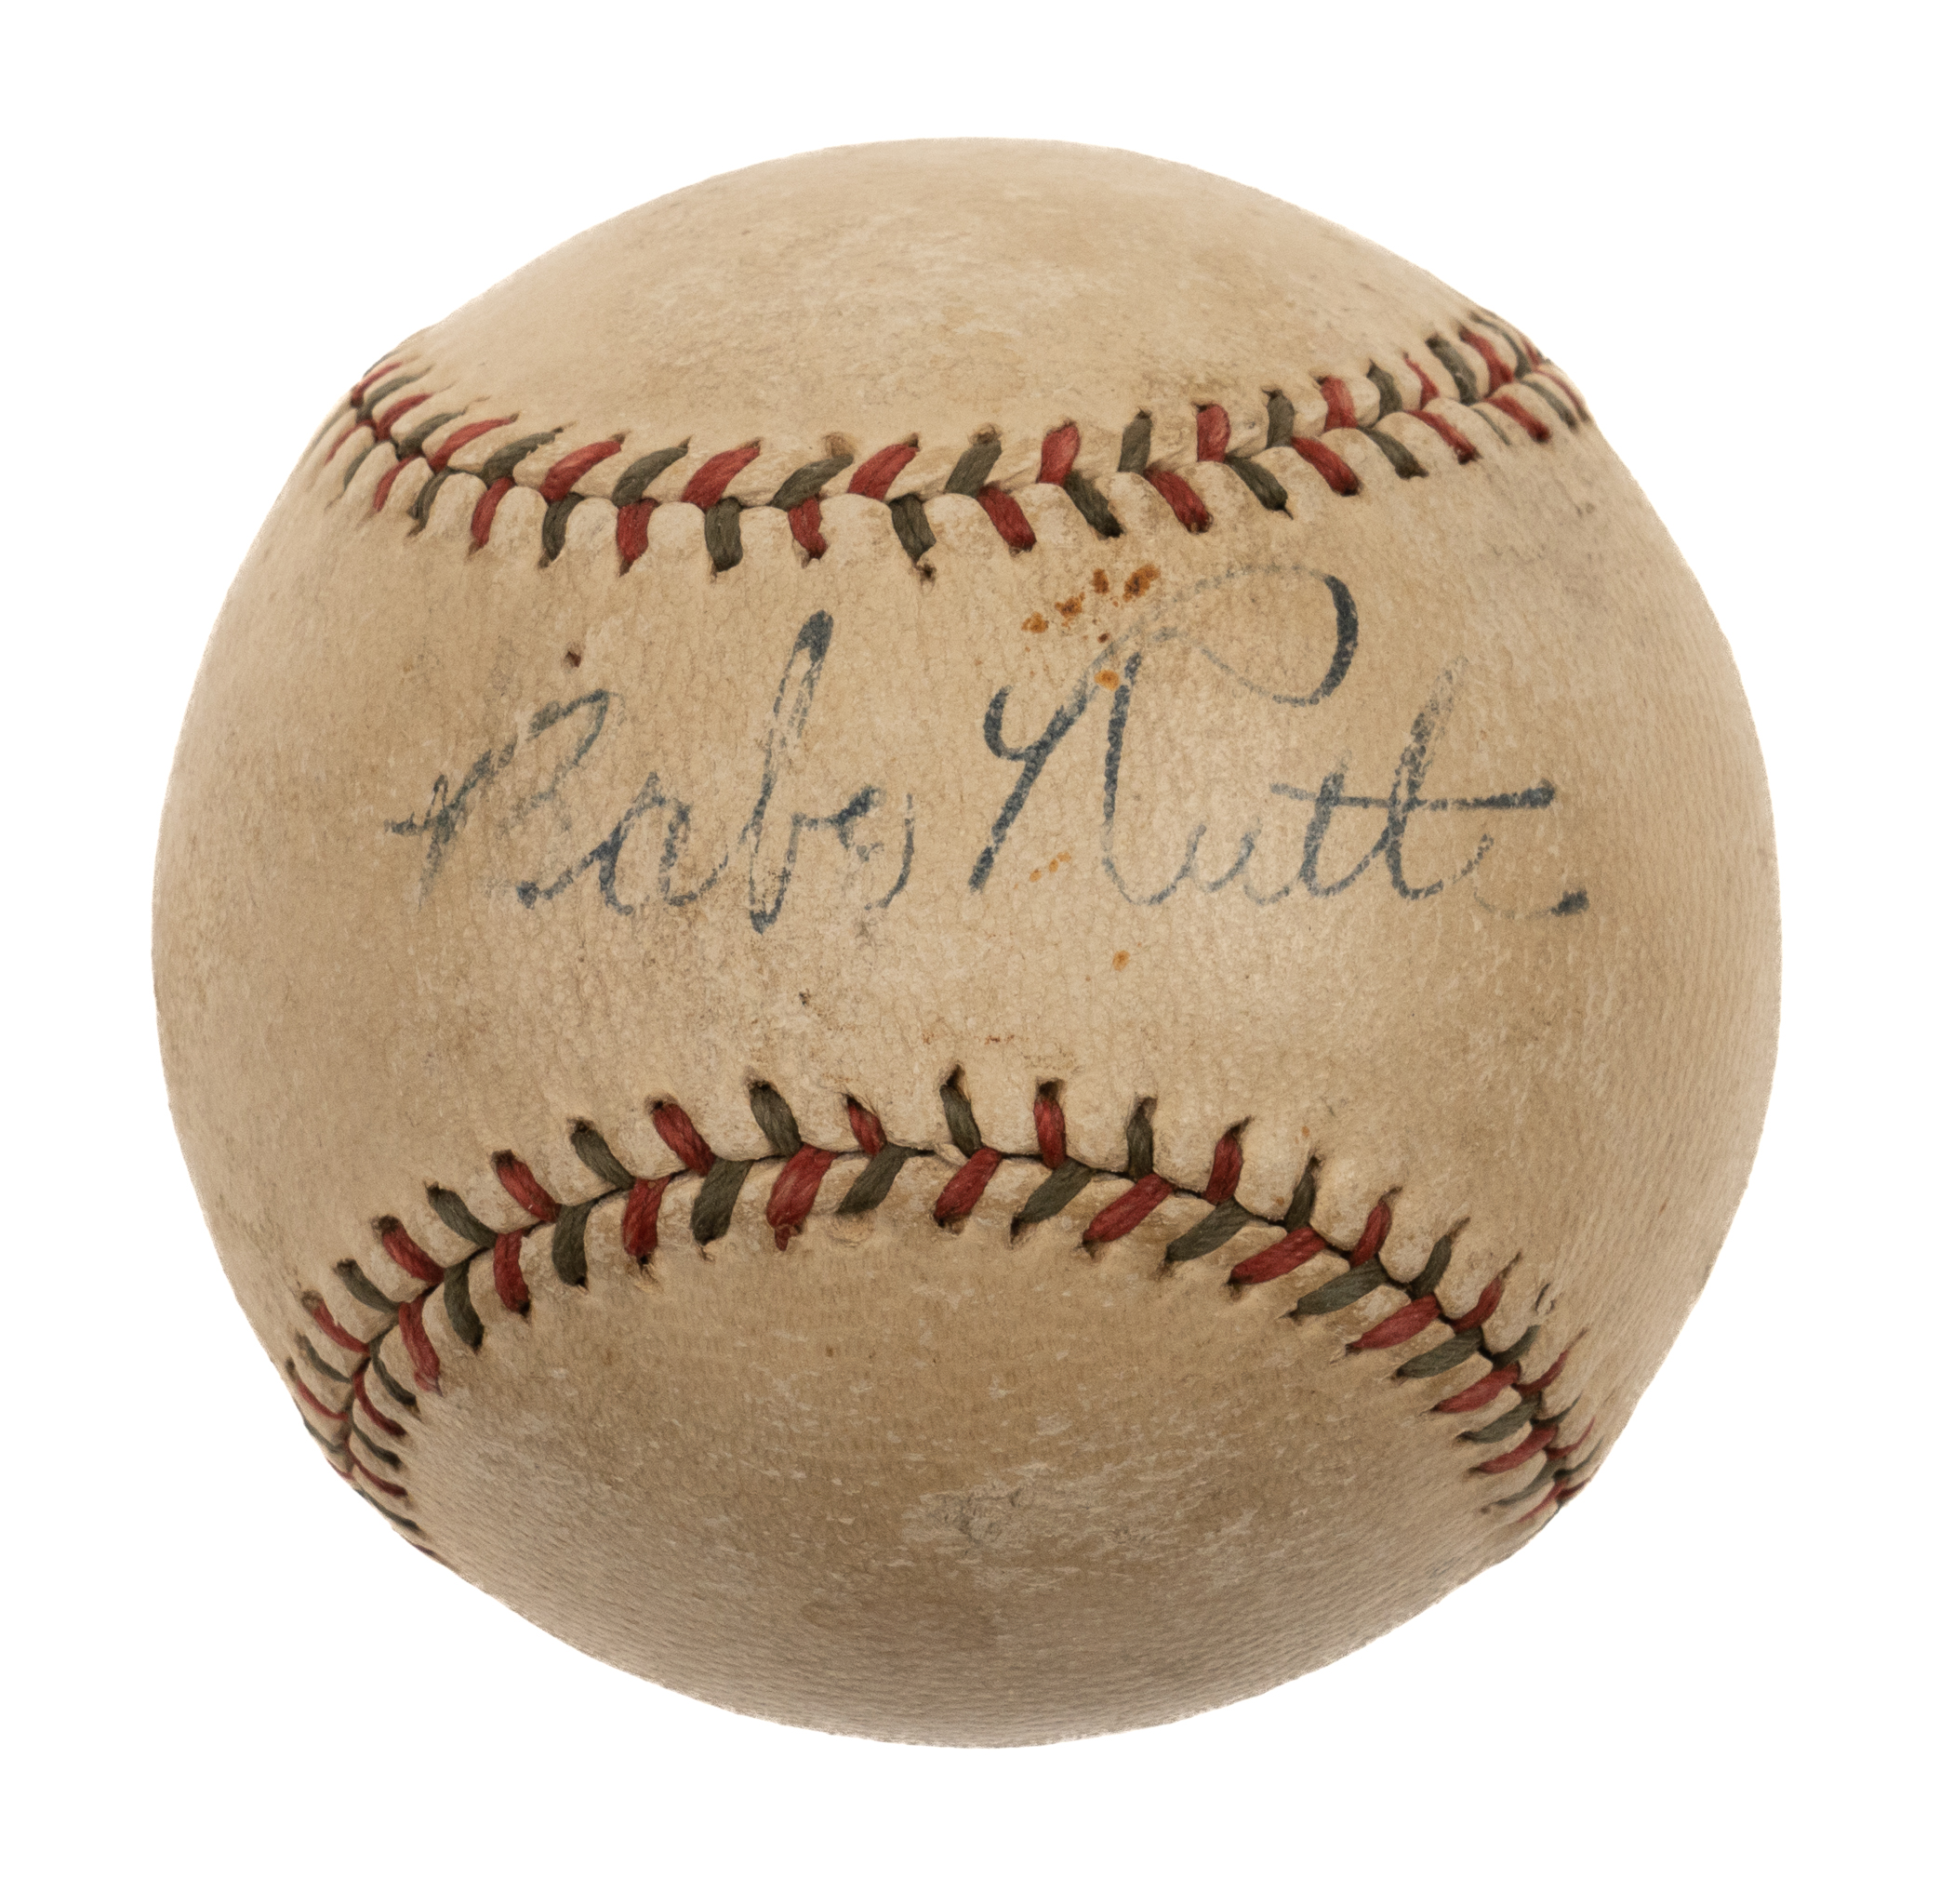 Babe Ruth single-signed baseball from the 1930s